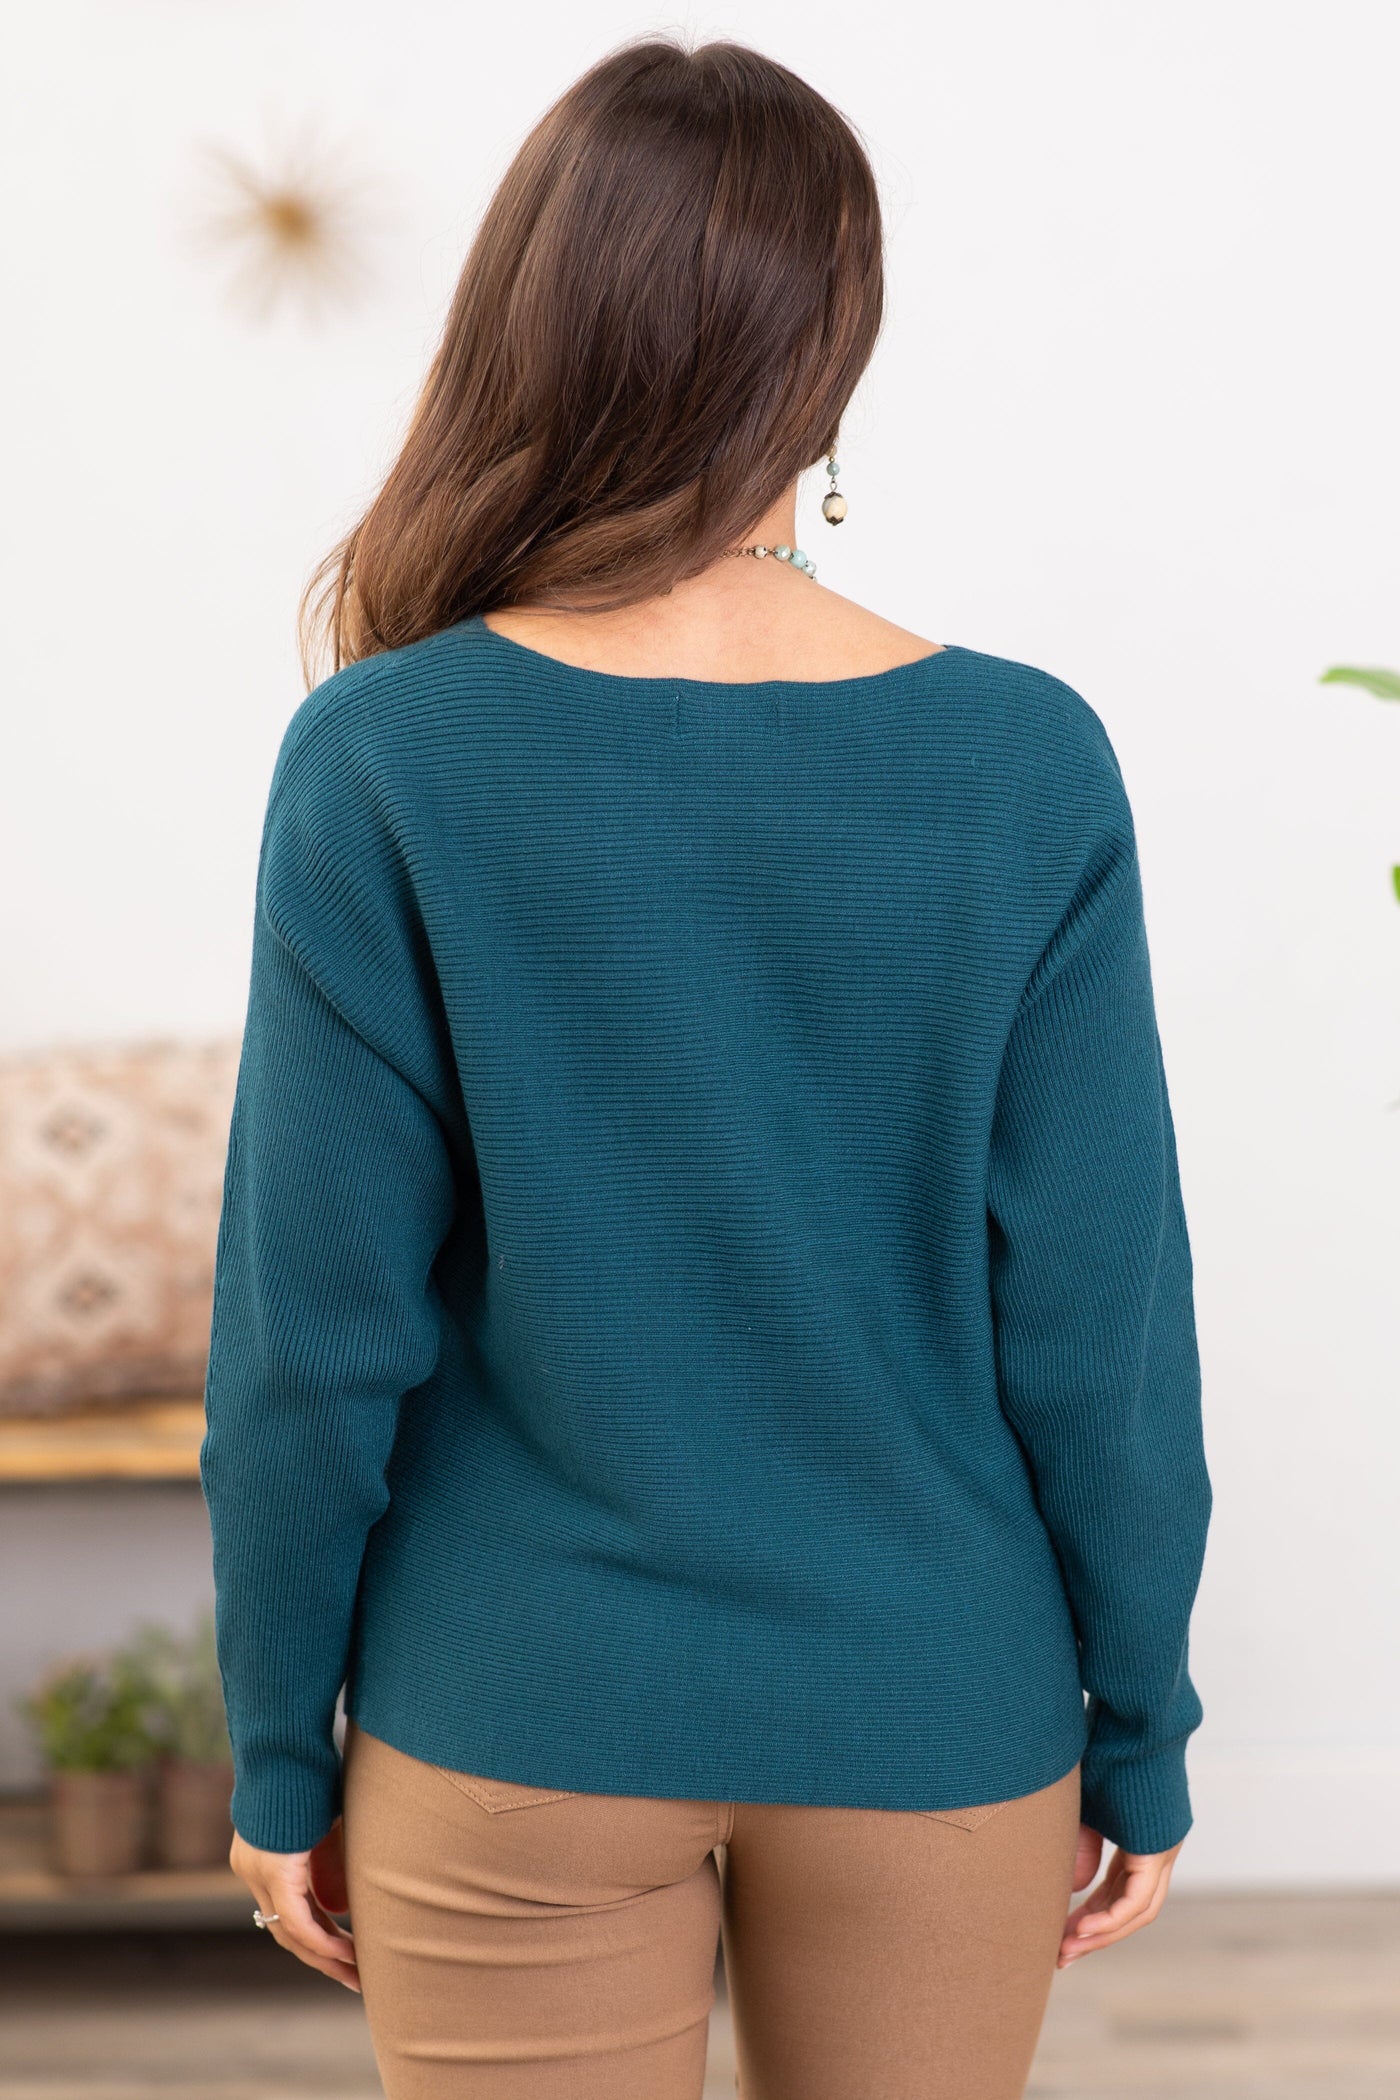 Teal Horizontal Ribbed Sweater - Filly Flair